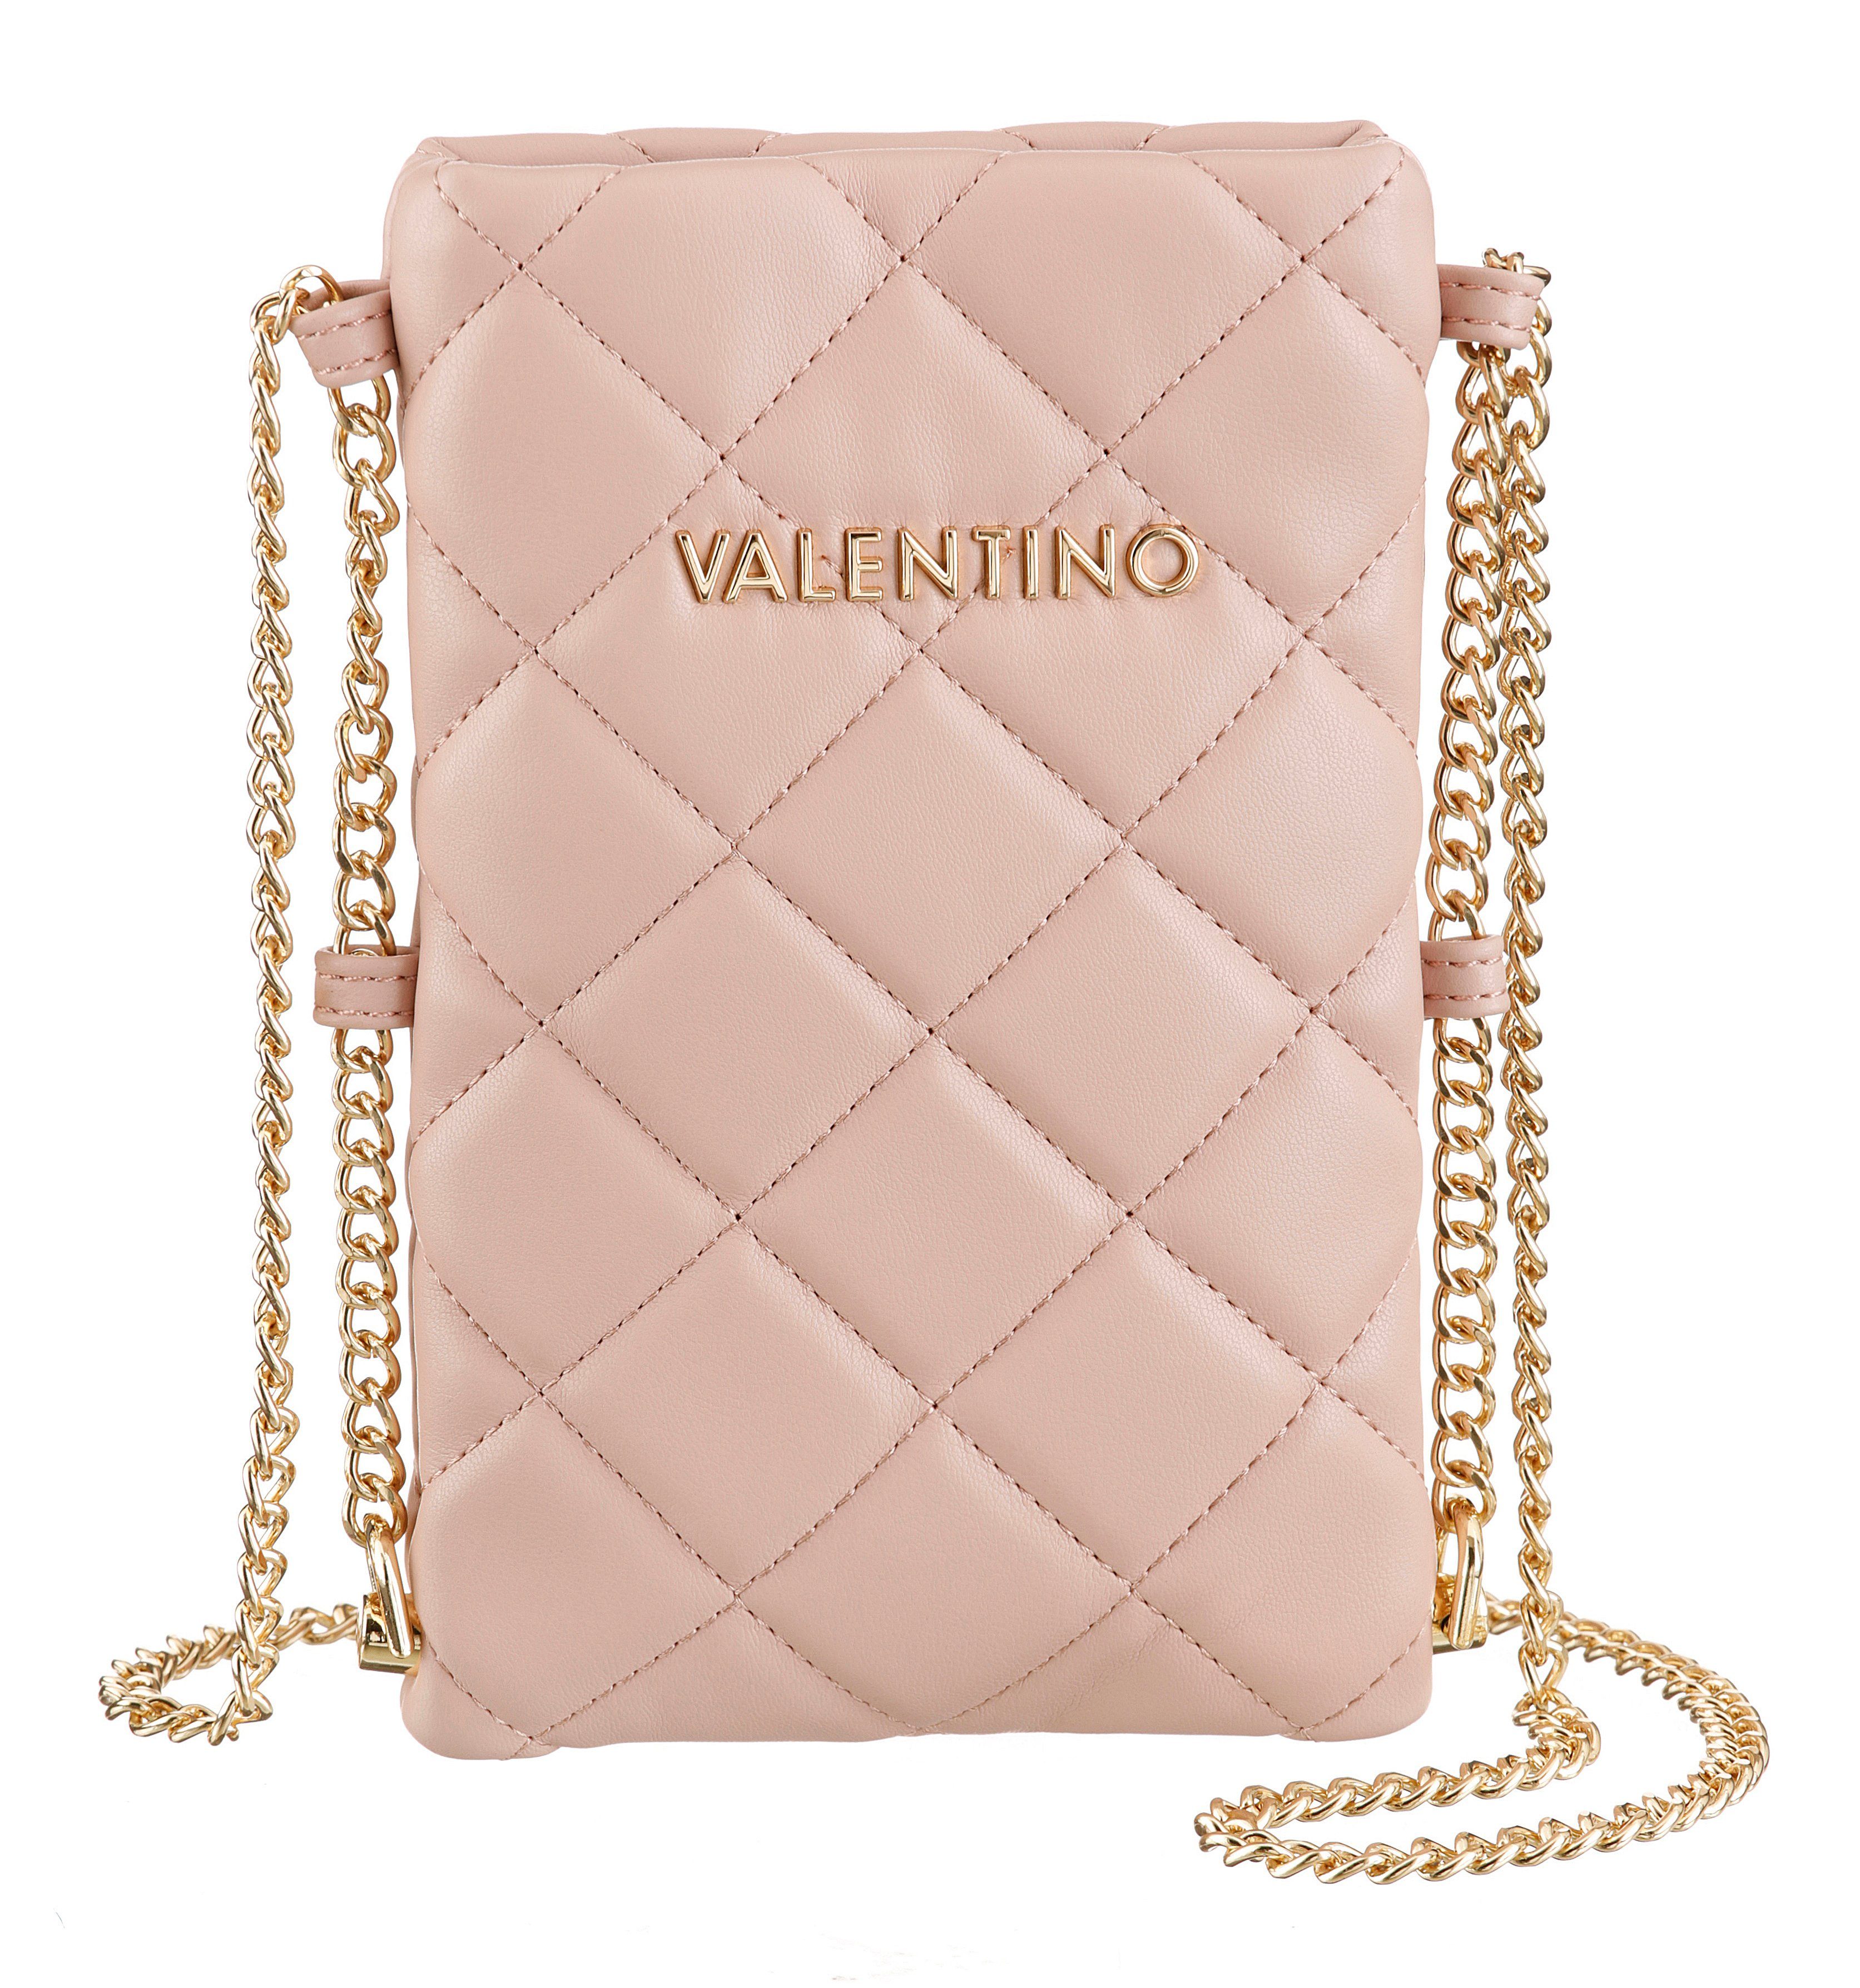 VALENTINO BAGS Smartphone-Hülle Ocarina, Polyester